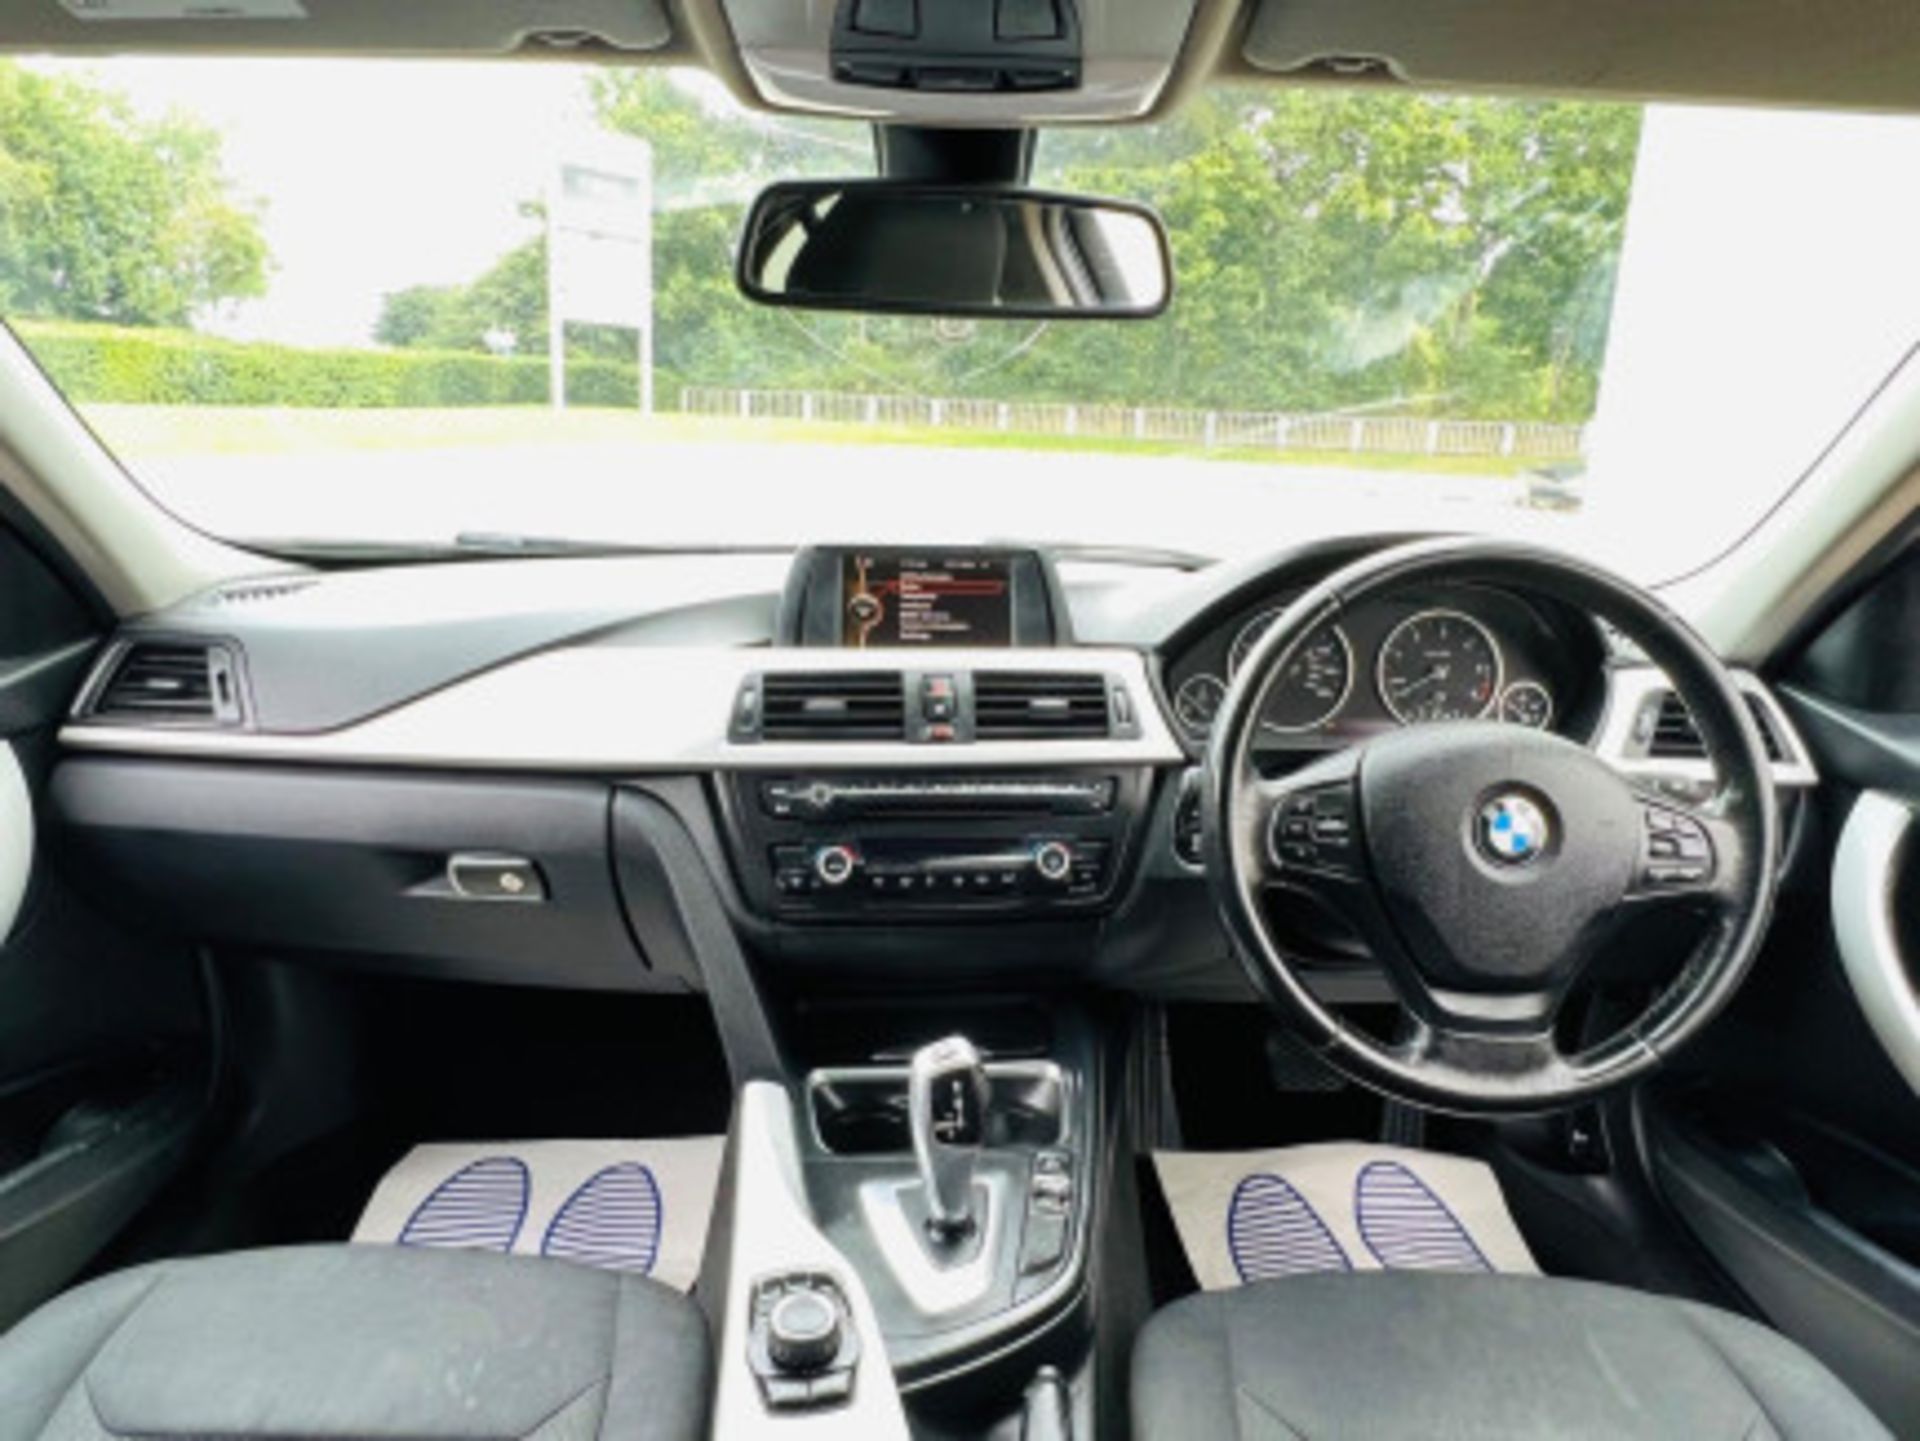 BMW 3 SERIES 2.0 DIESEL ED START STOP - A WELL-MAINTAINED GEM >>--NO VAT ON HAMMER--<< - Image 39 of 229